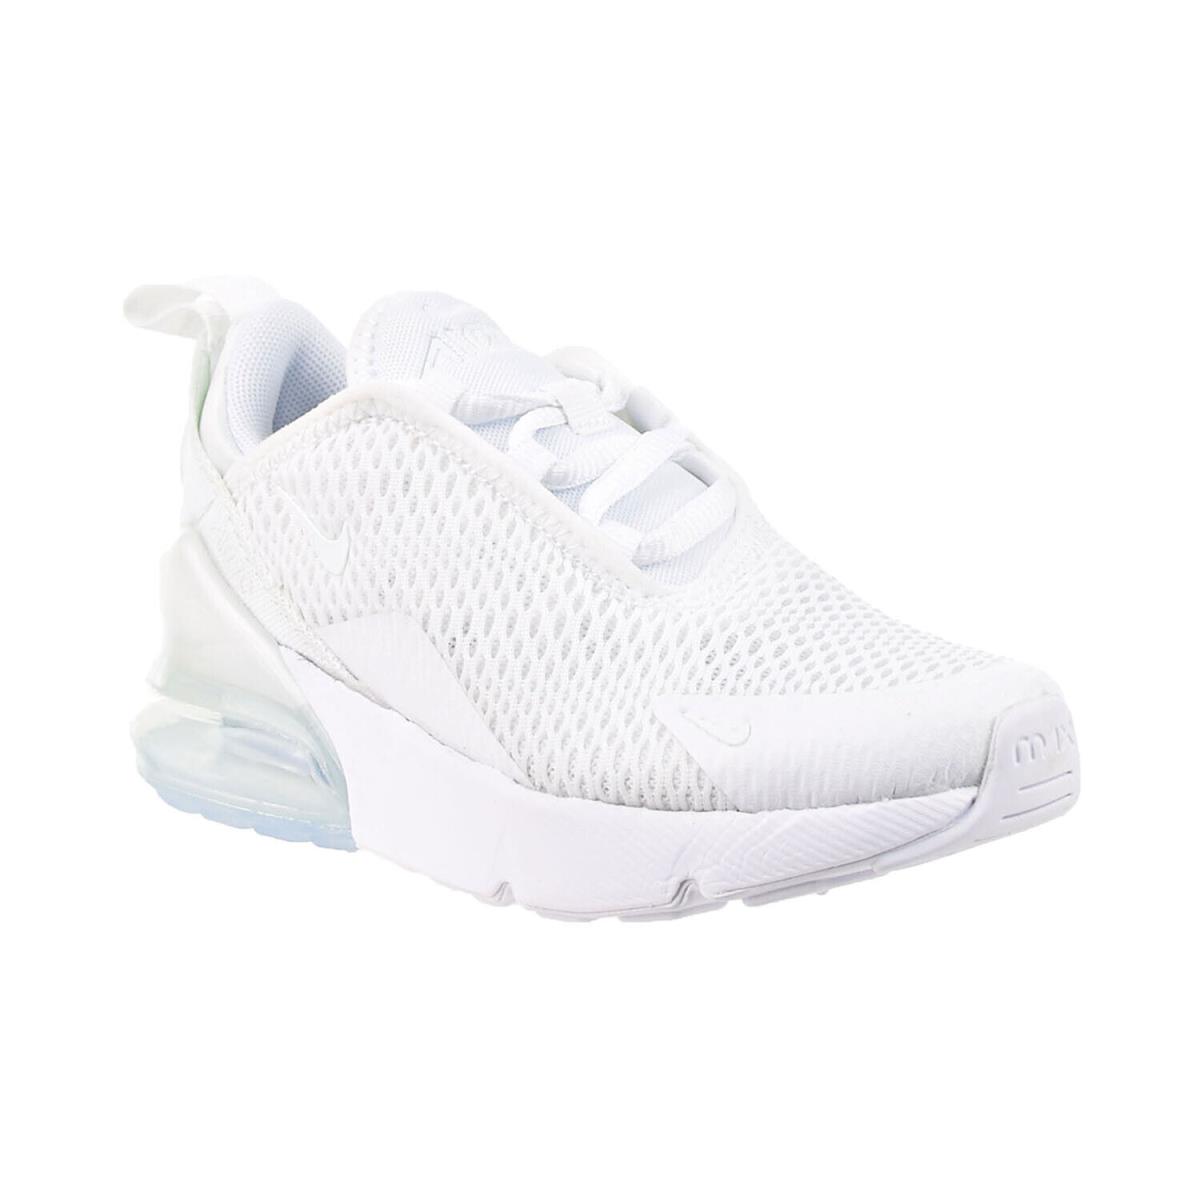 Nike Air Max 270 PS Little Kids` Shoes White-metallic Silver AO2372-103 - White-Metallic Silver